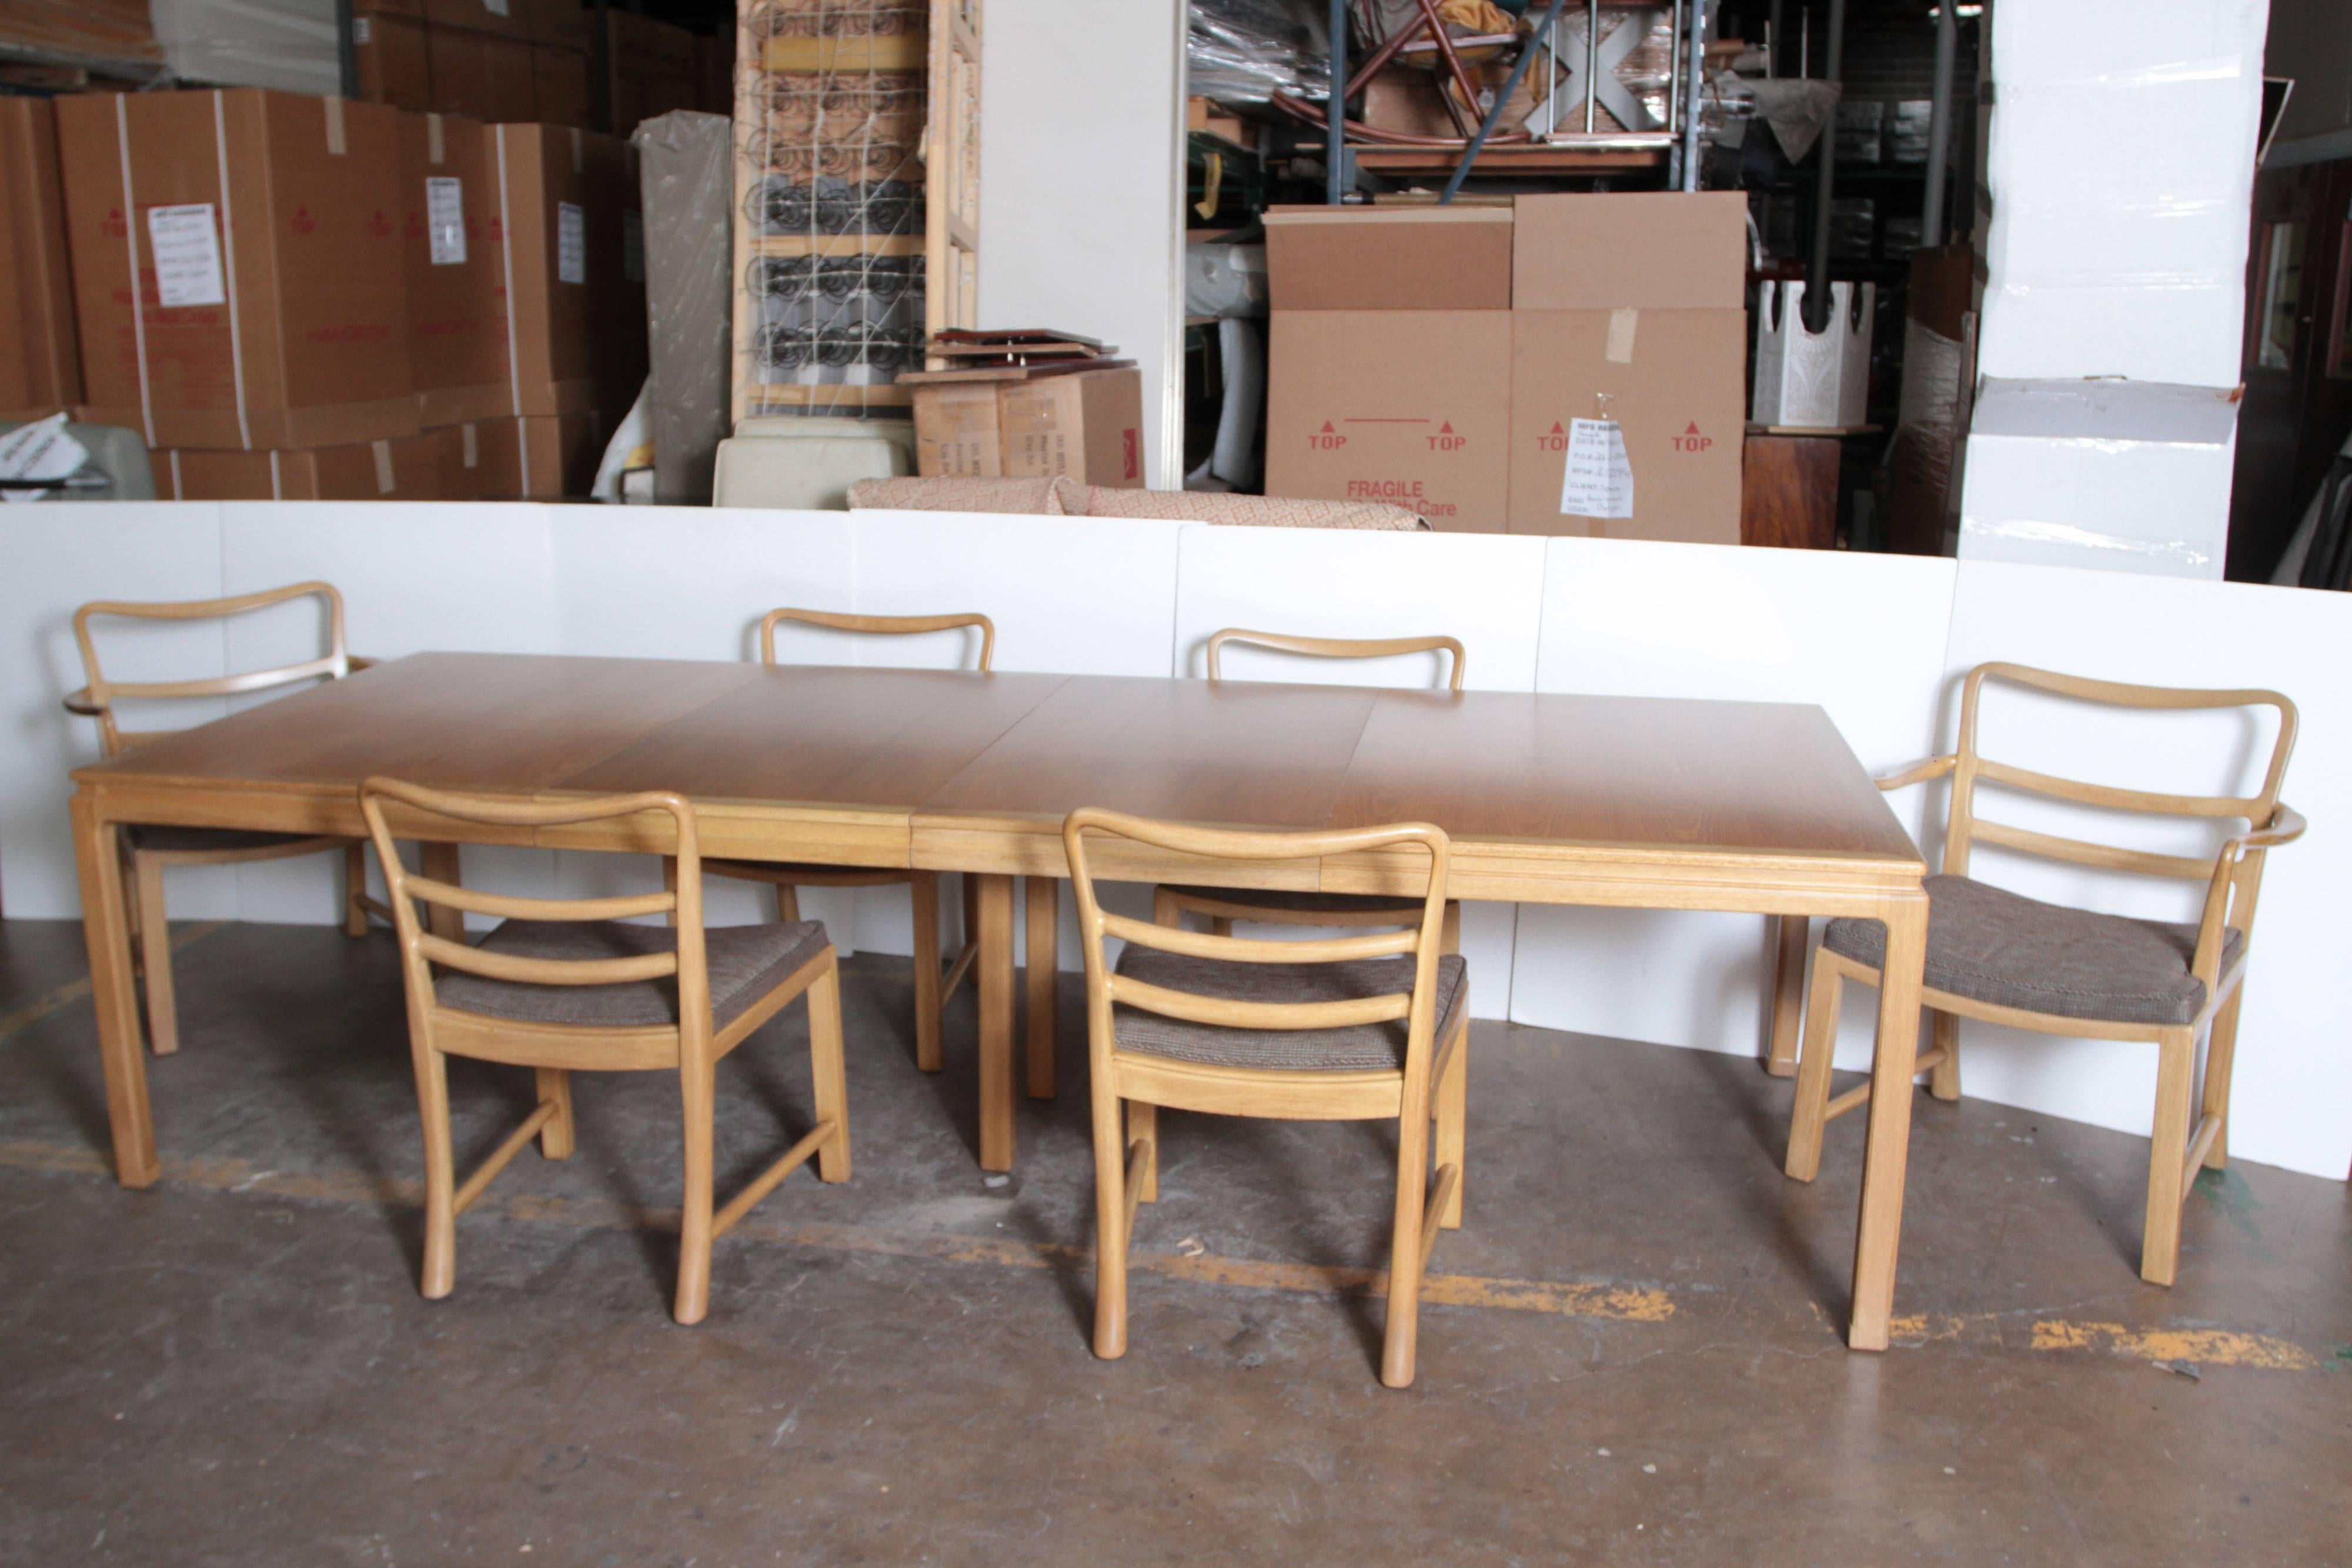 Edward Wormley Dunbar dining table with six chairs two leaves. Two armchairs, four side chairs.  Mid-century modern

Fine example of a massive Mid Century extension dining table, complete with two large 24